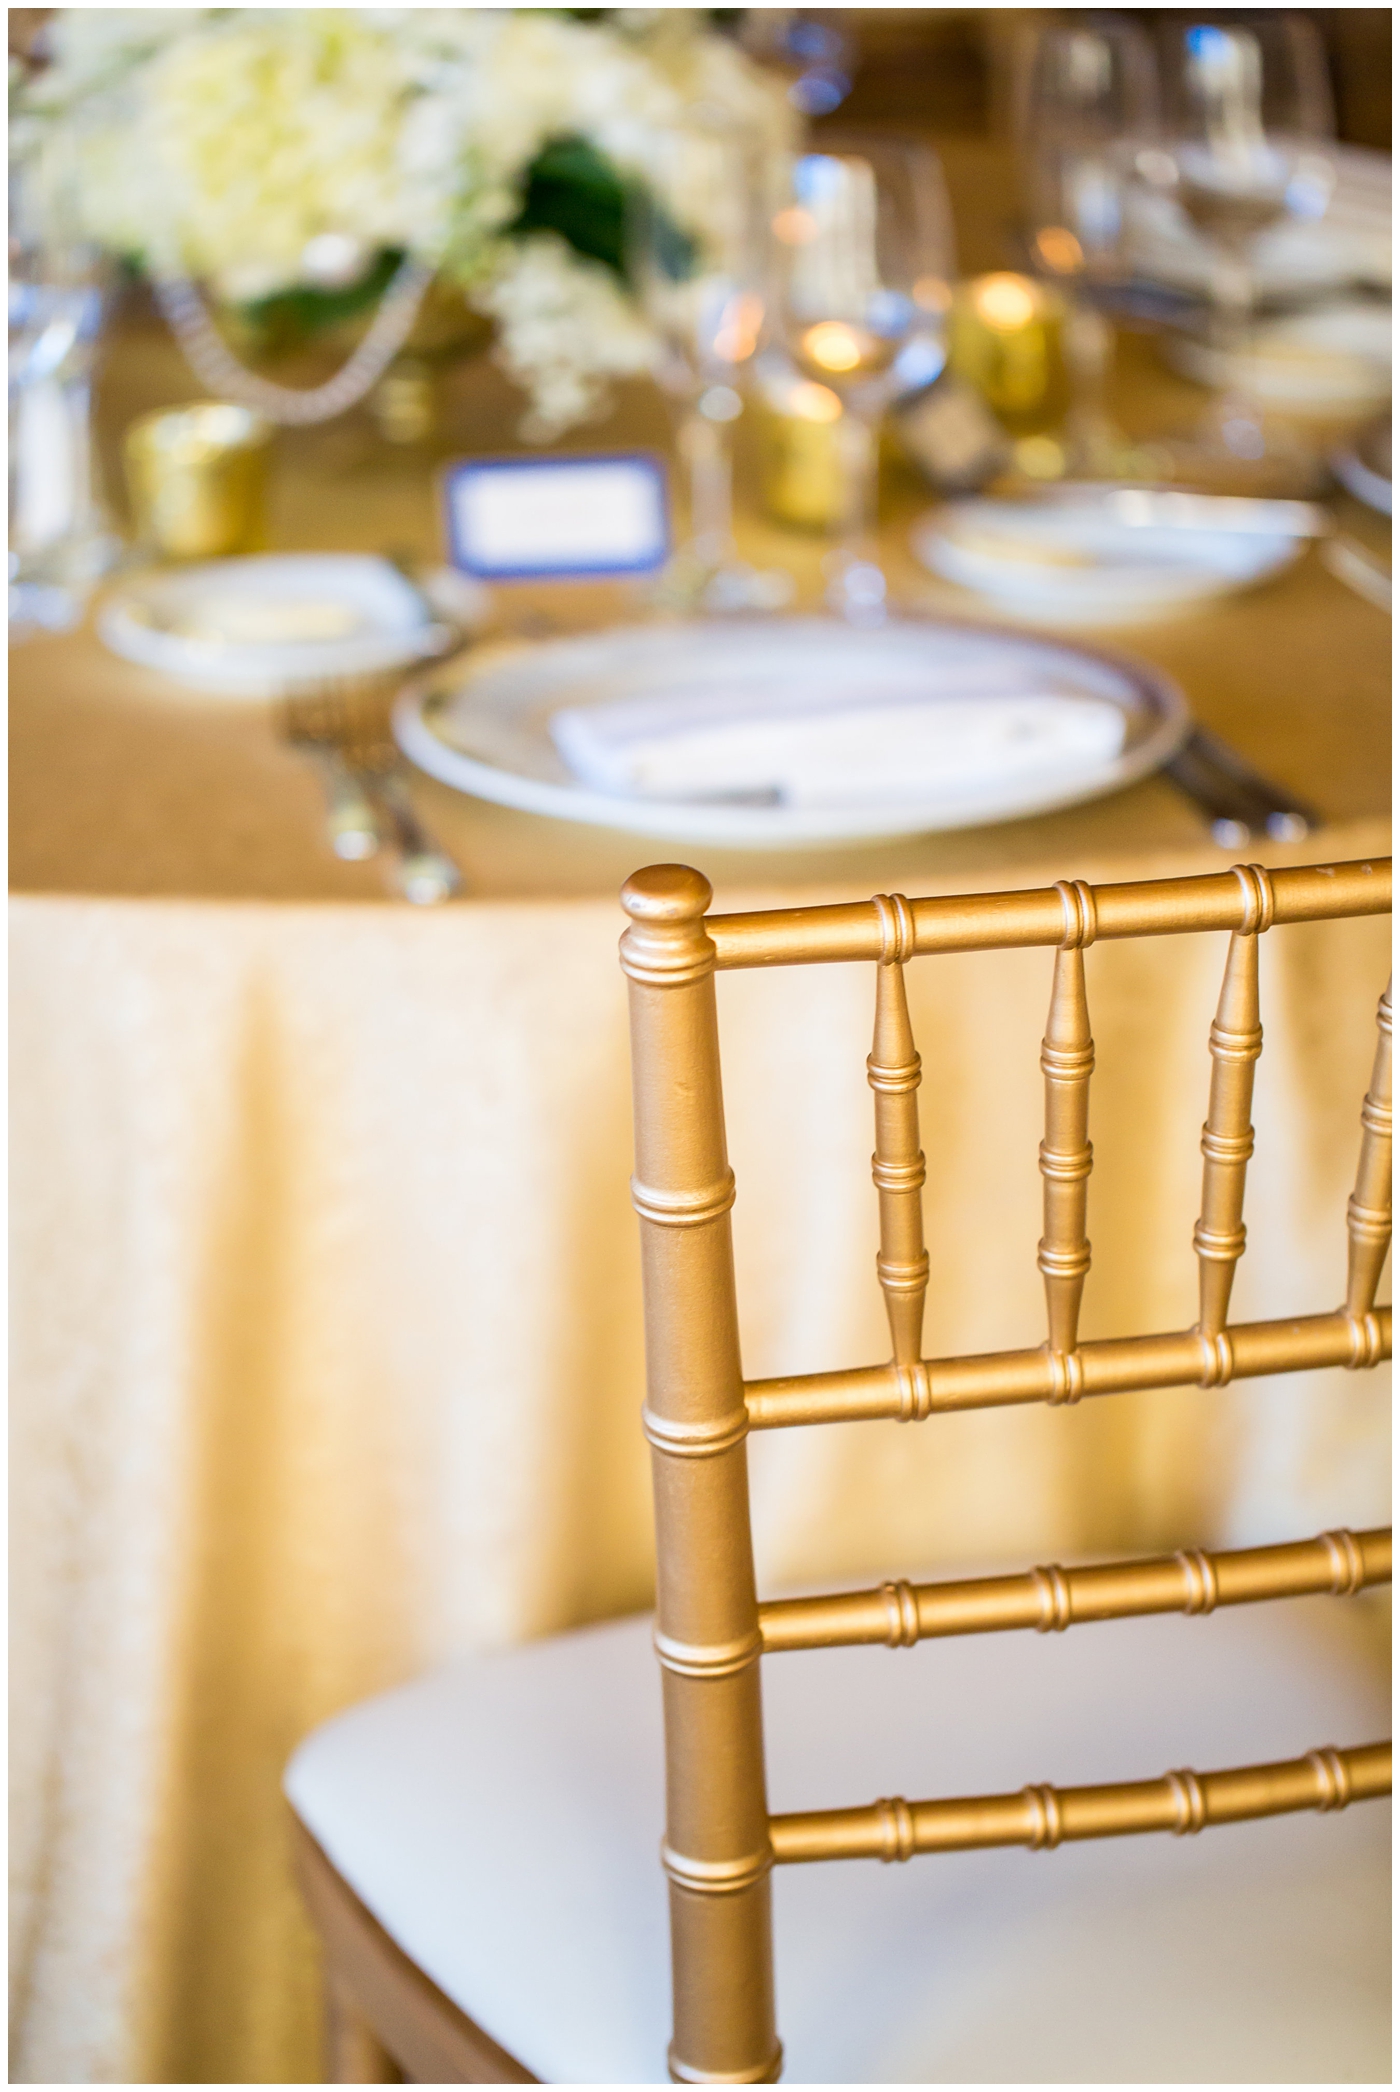 Arizona Biltmore gold ballroom wedding reception details with gold chairs and tablecloths with white roses and greenery centerpieces in gold vases with glitter royal blue placecards